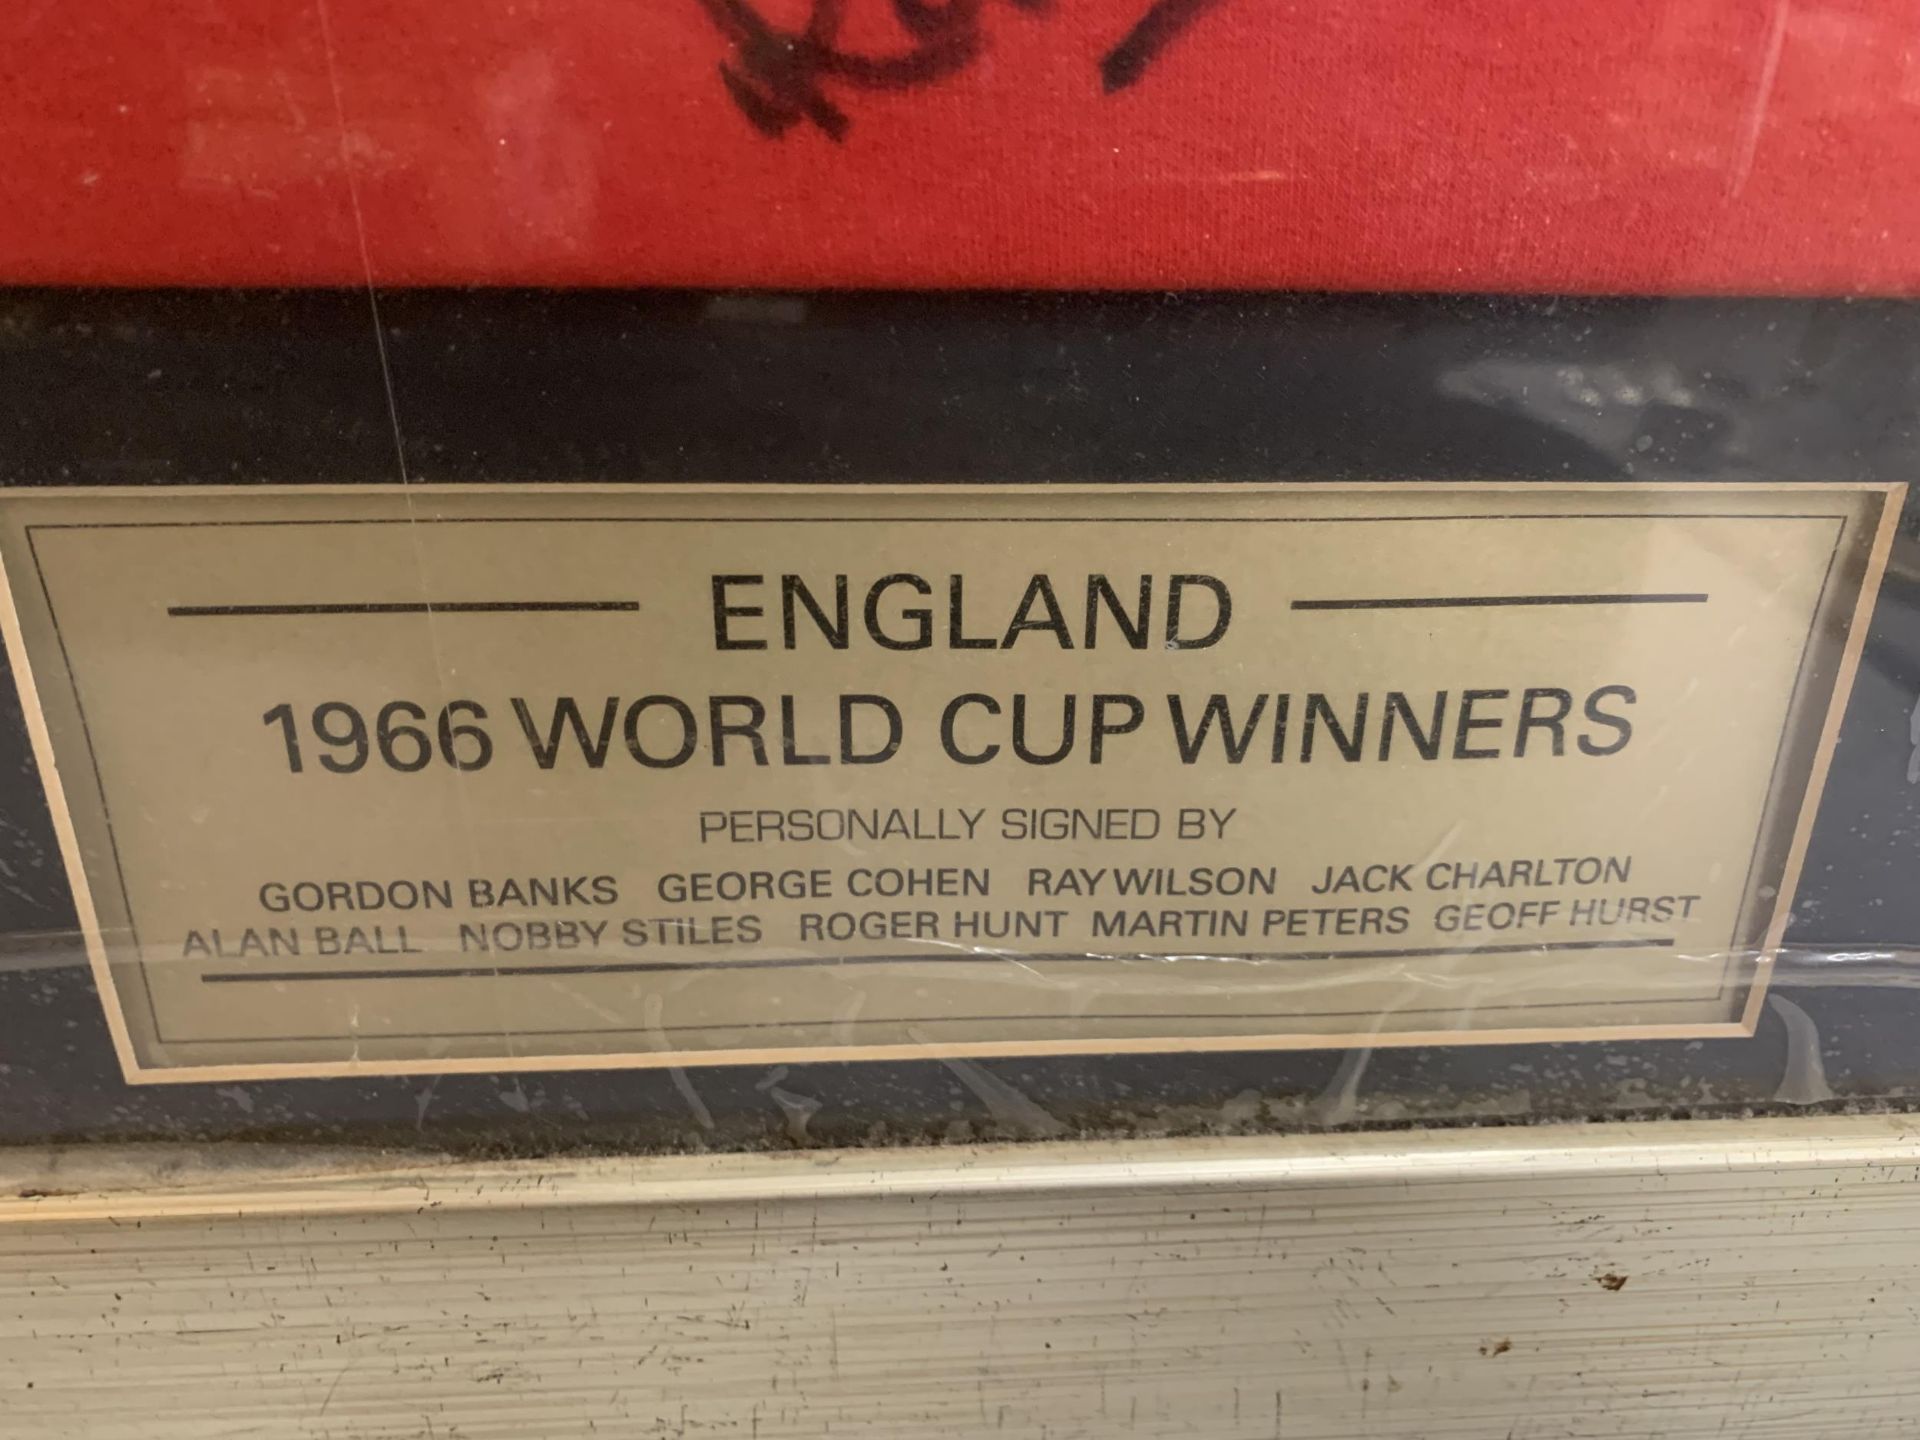 A FRAMED AUTHENTIC 1966 ENGLAND WORLD CUP FOOTBALL SHIRT SIGNED BY GORDON BANKS, GEOFF HURST, JACK - Image 5 of 9